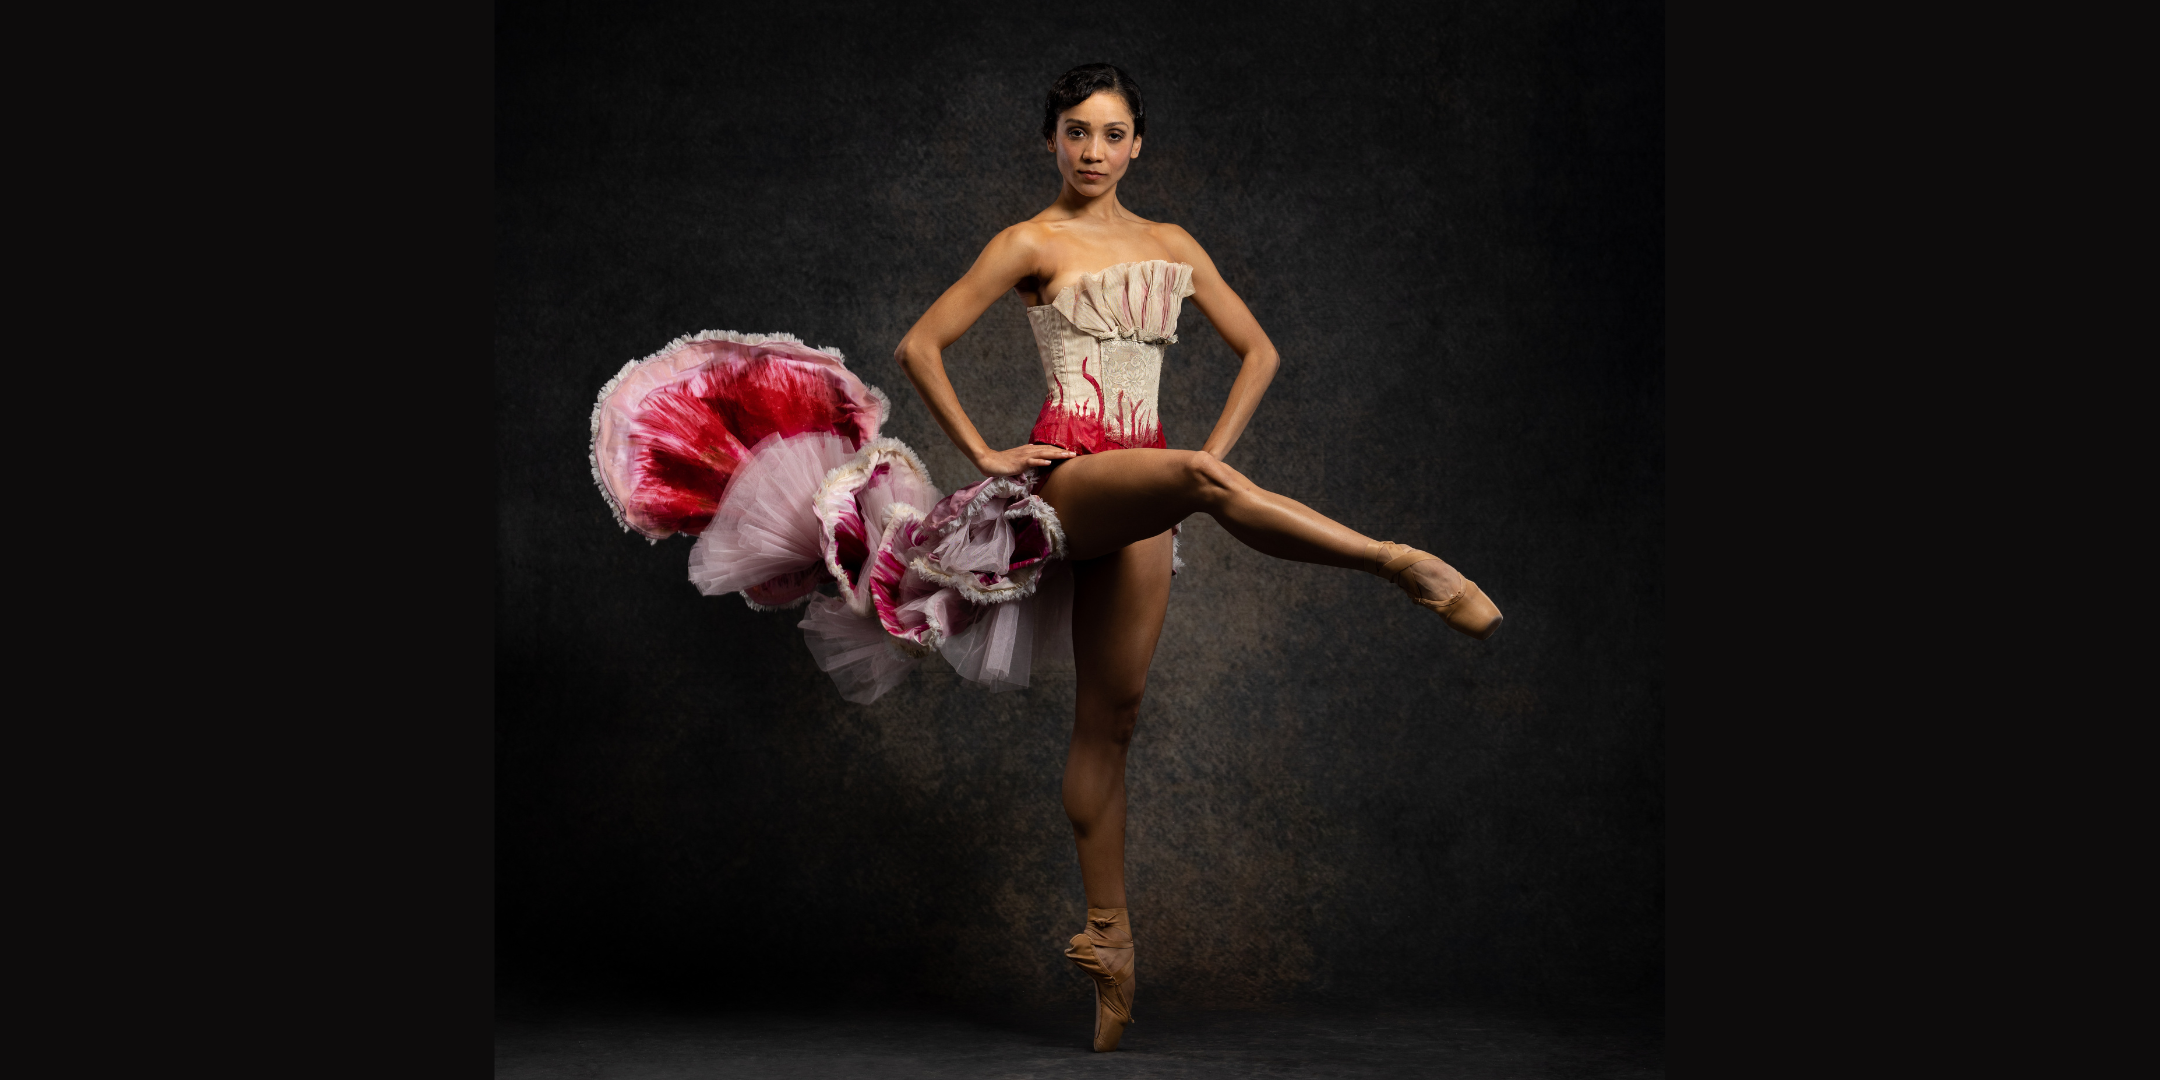 Nayara Lopes poses in a croisé attitude devant en pointe as Carmen. She wears a long, layered scarlet skirt with gold trimming and a gold bodice. She rests her hands on her hips and looks into the camera with a sly smile.